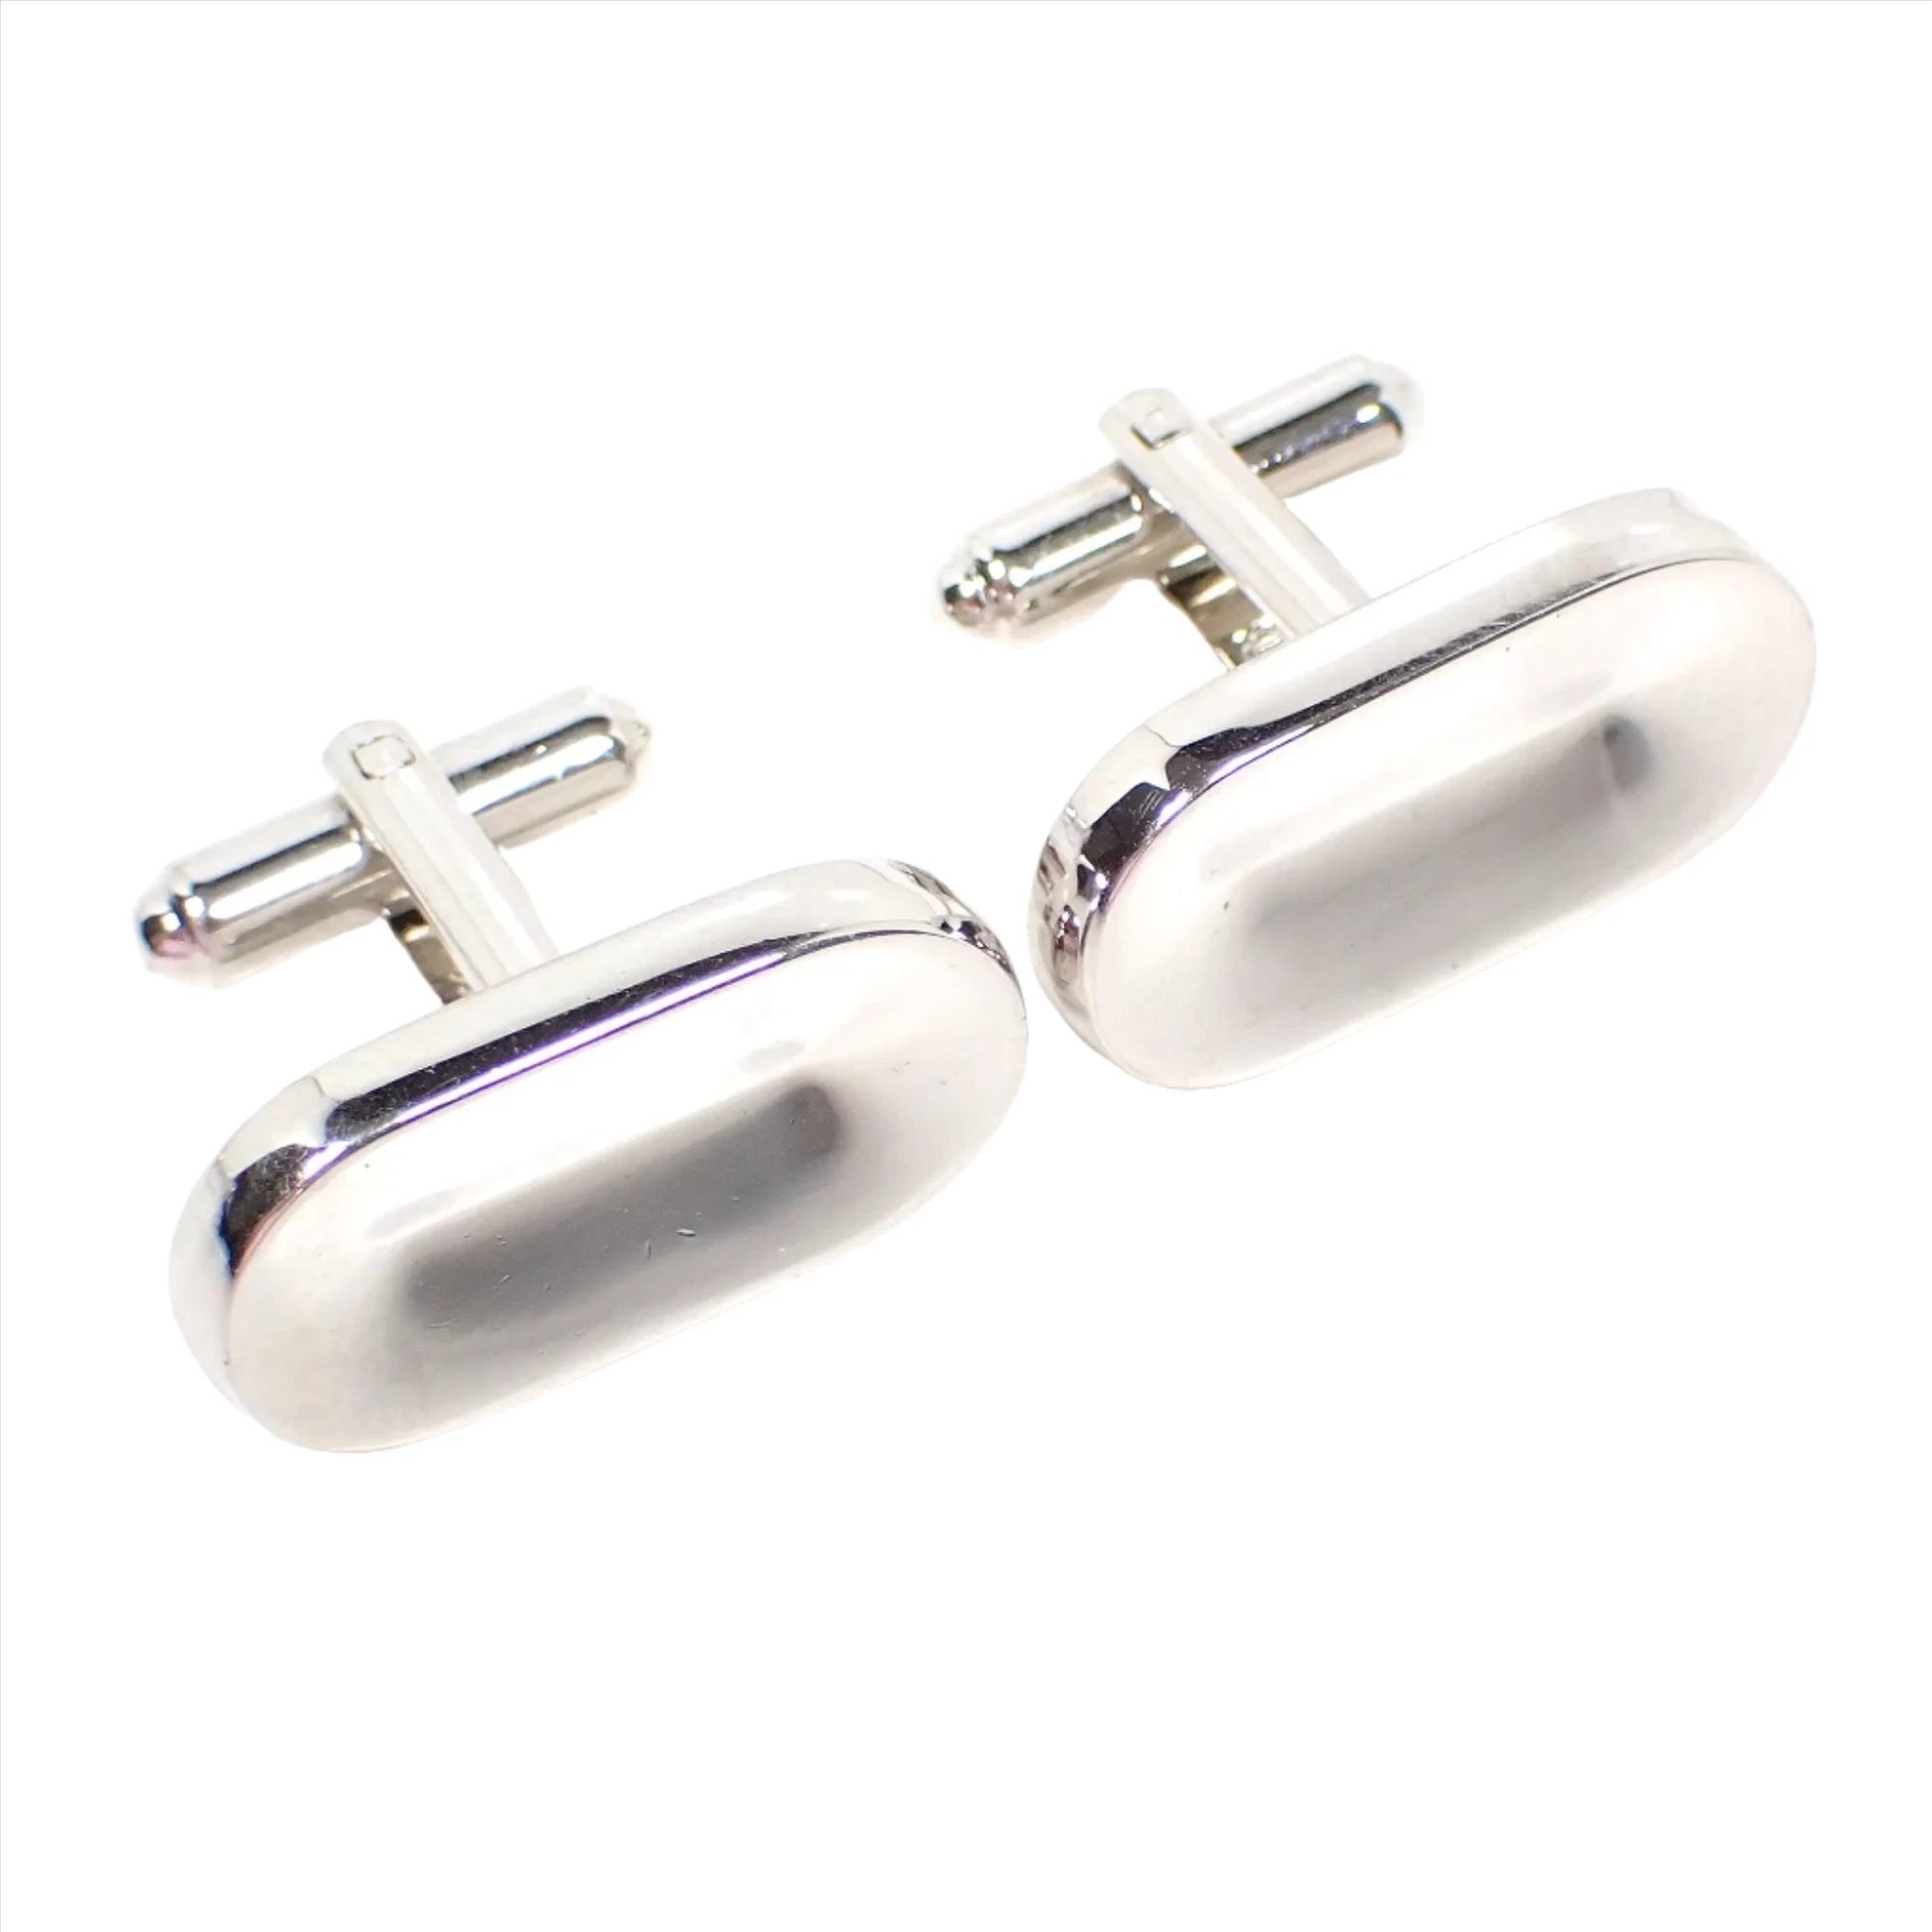 Angled front view of the retro vintage Hickok cufflinks. The metal is silver tone in color. They are shaped like long ovals with an indented middle area